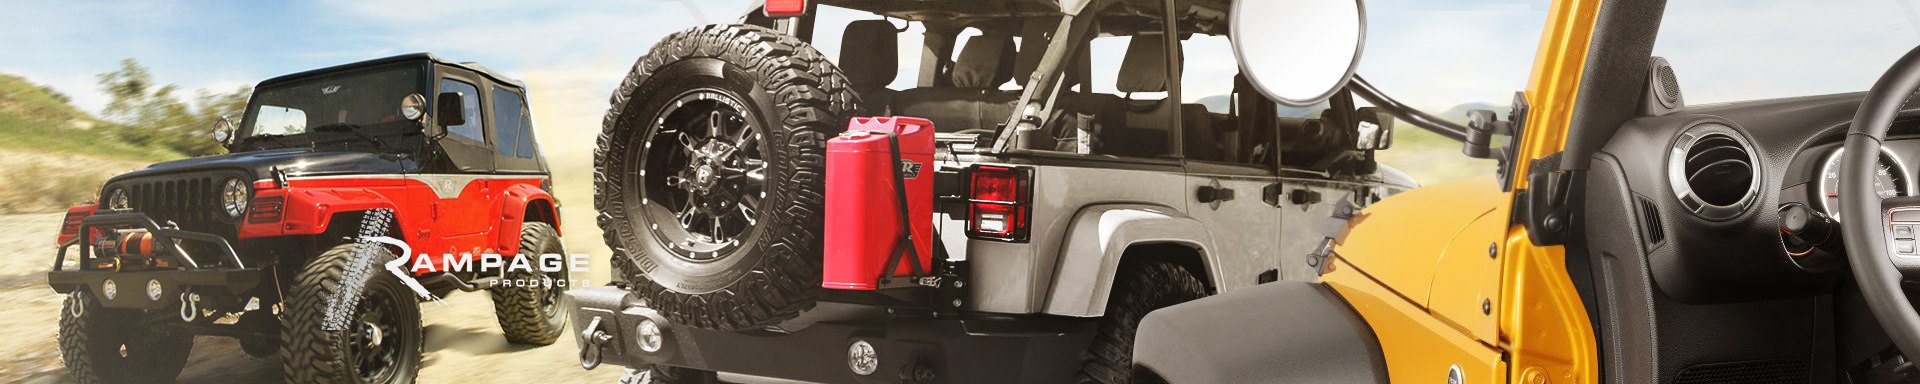 Rampage Portable Tool Boxes & Totes